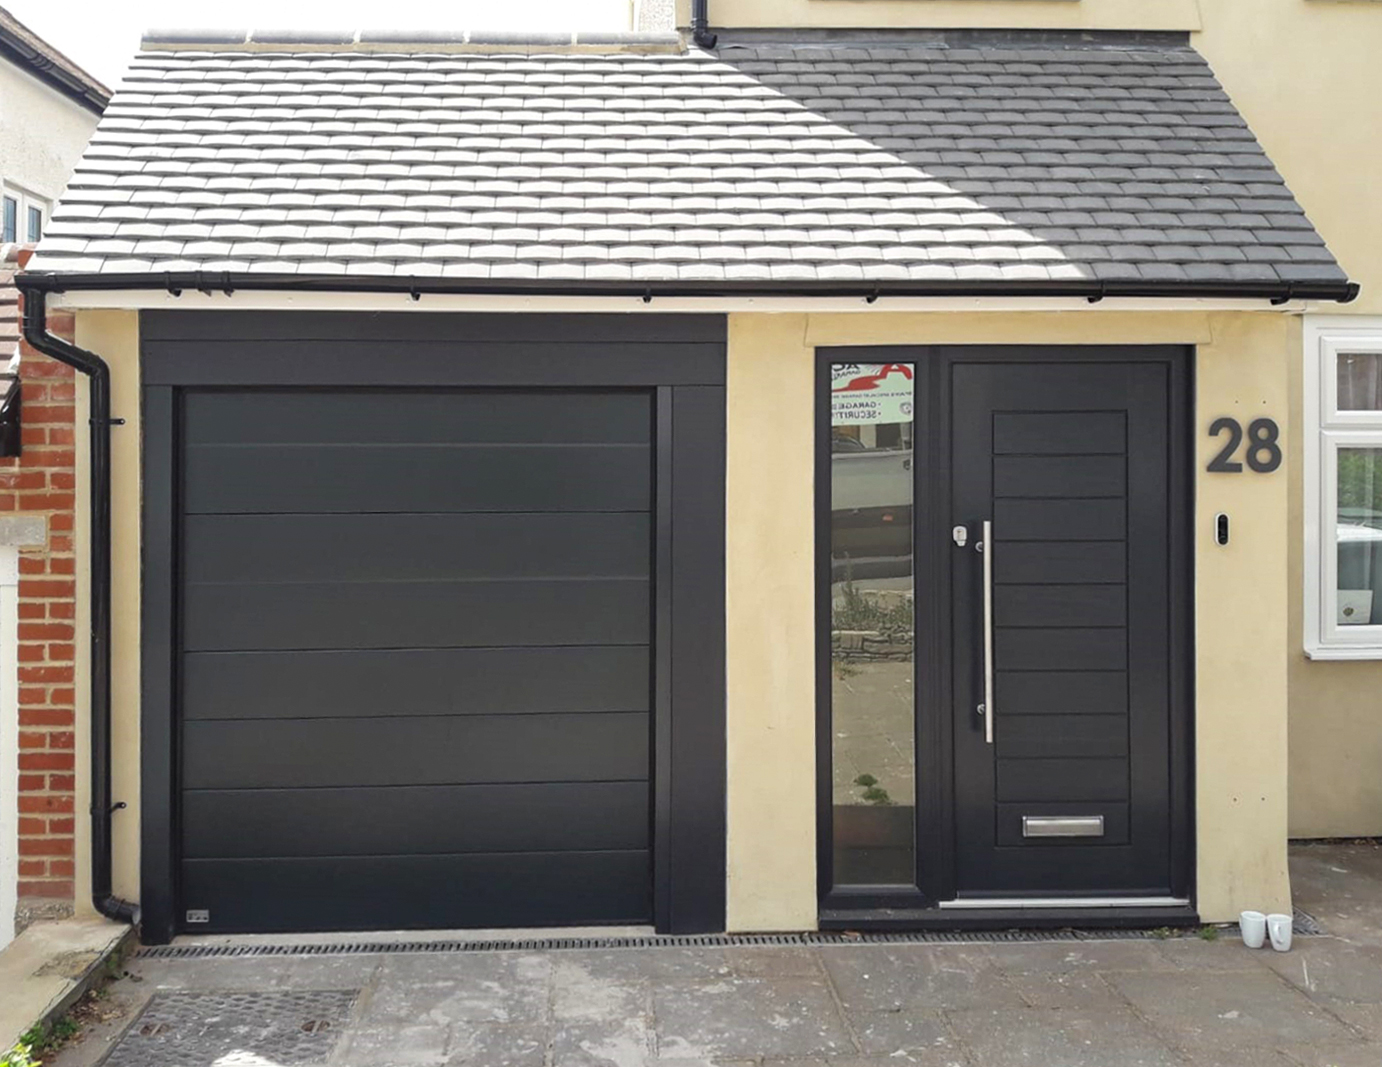 SWS Elite Insulated Sectional Garage Door Finished in Anthracite Grey